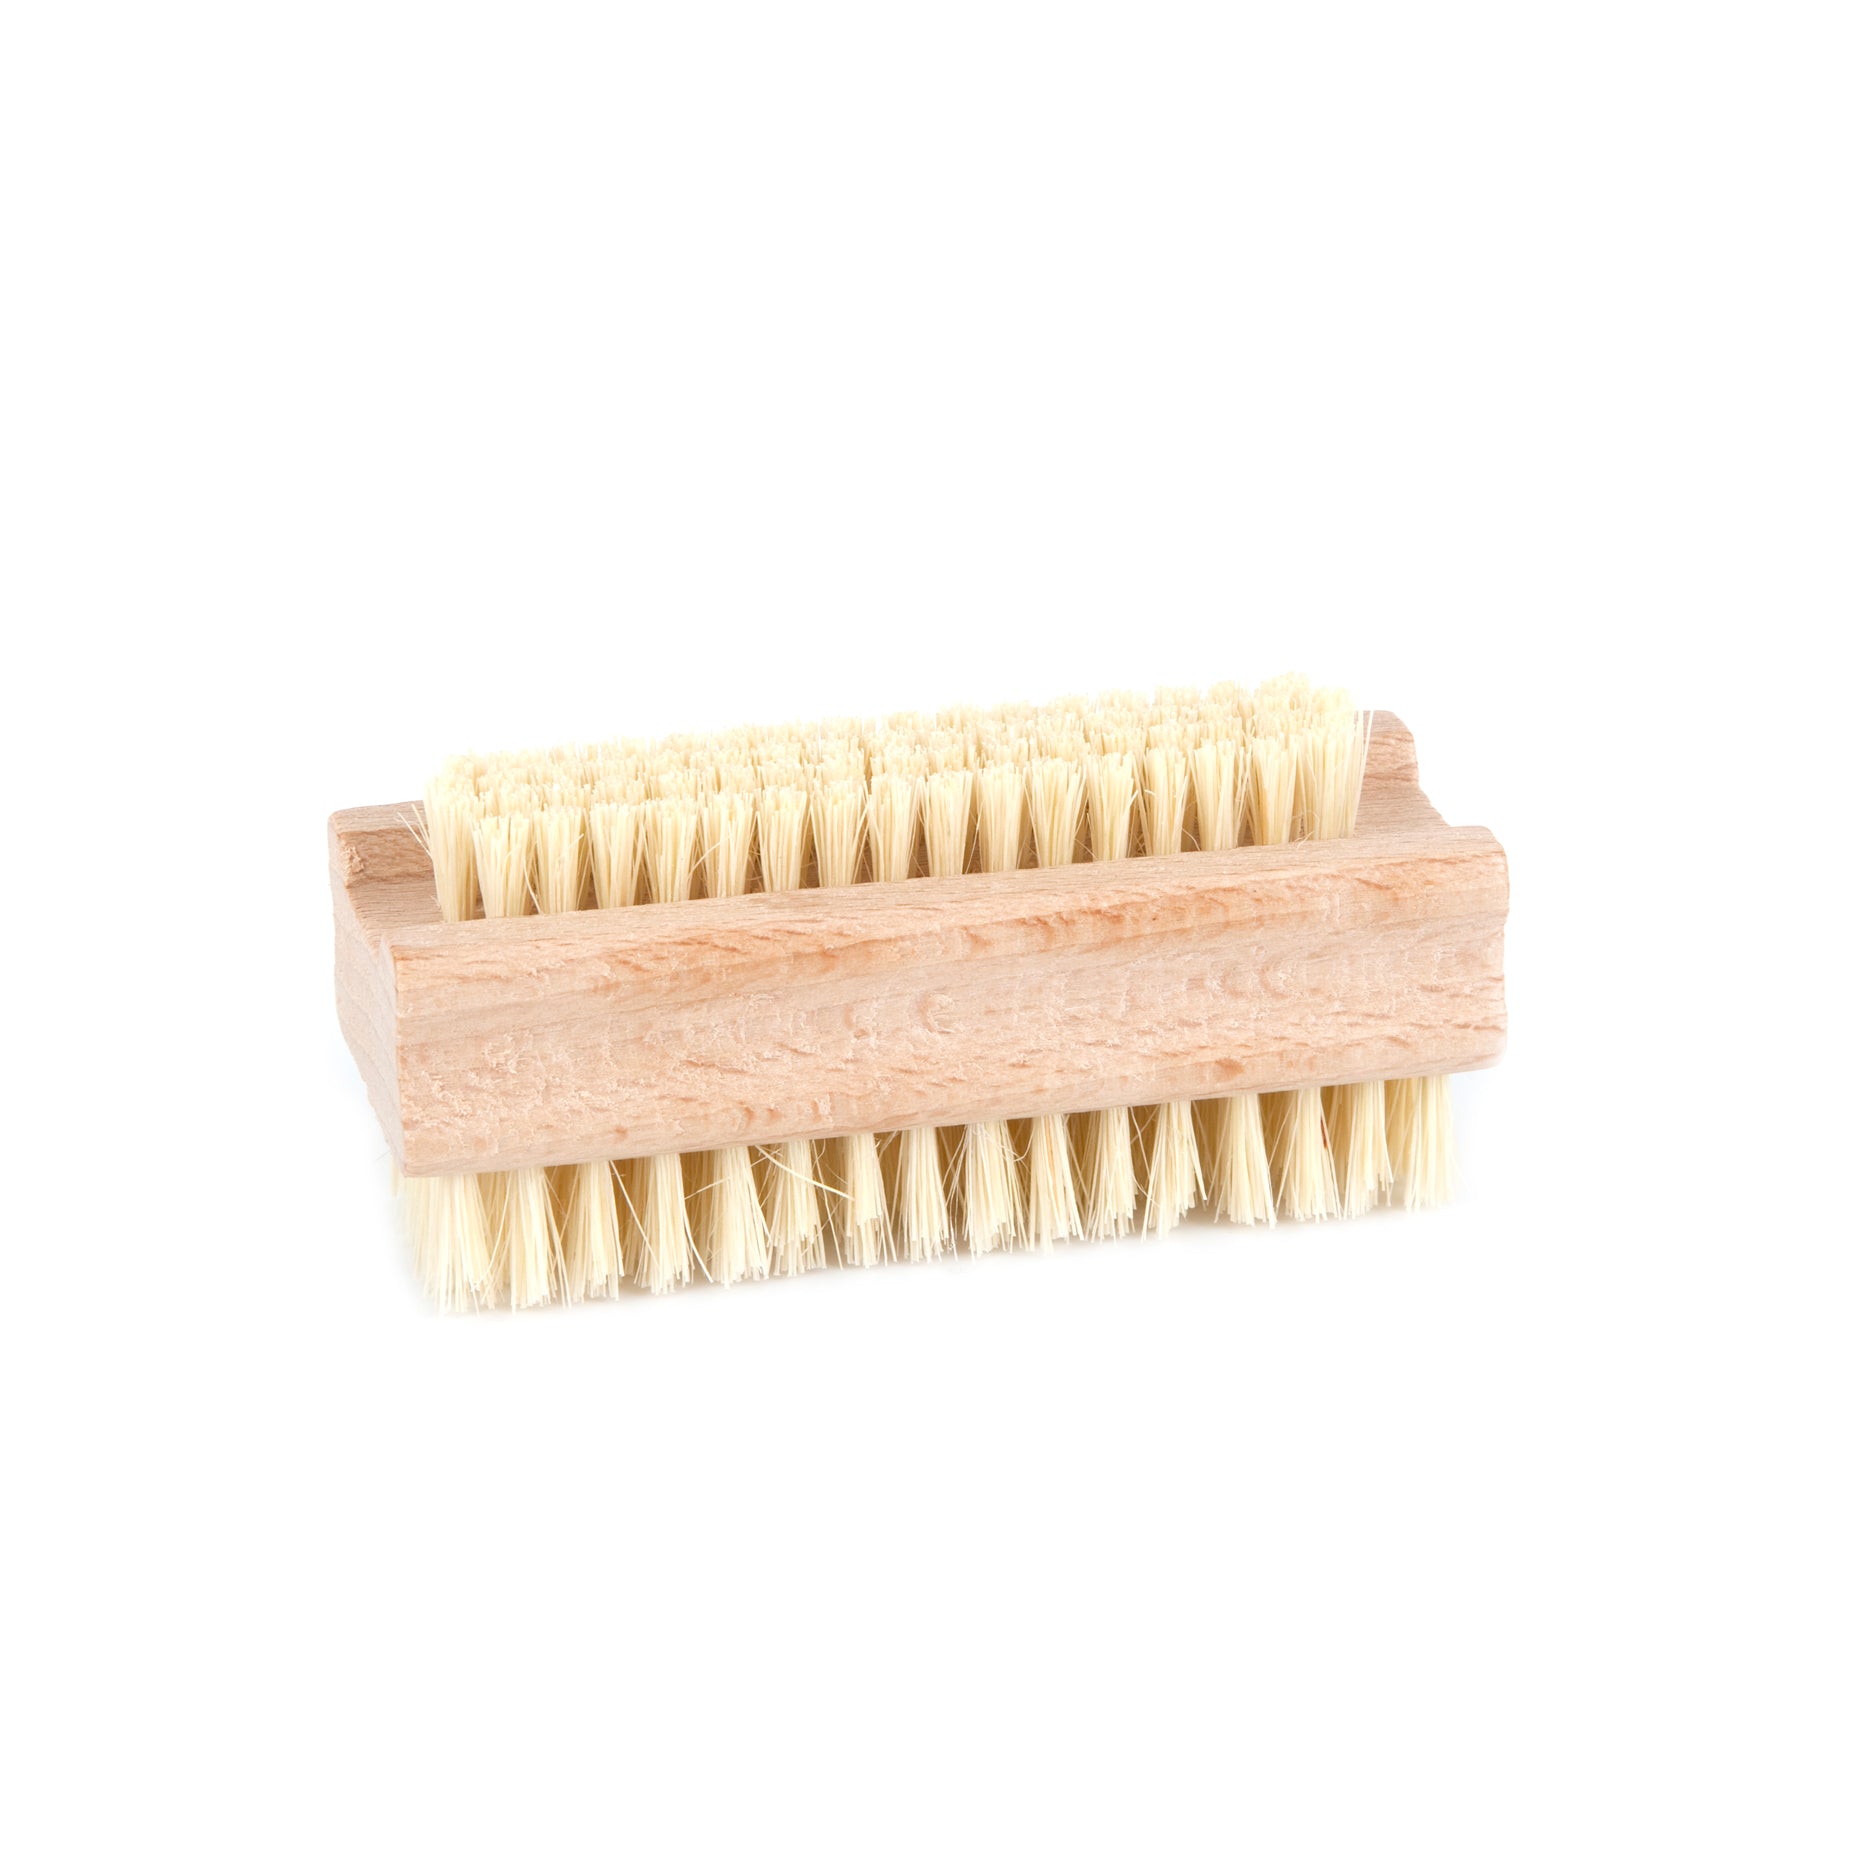 Double-sided nail brush made of Tampico fibers and Ash wood